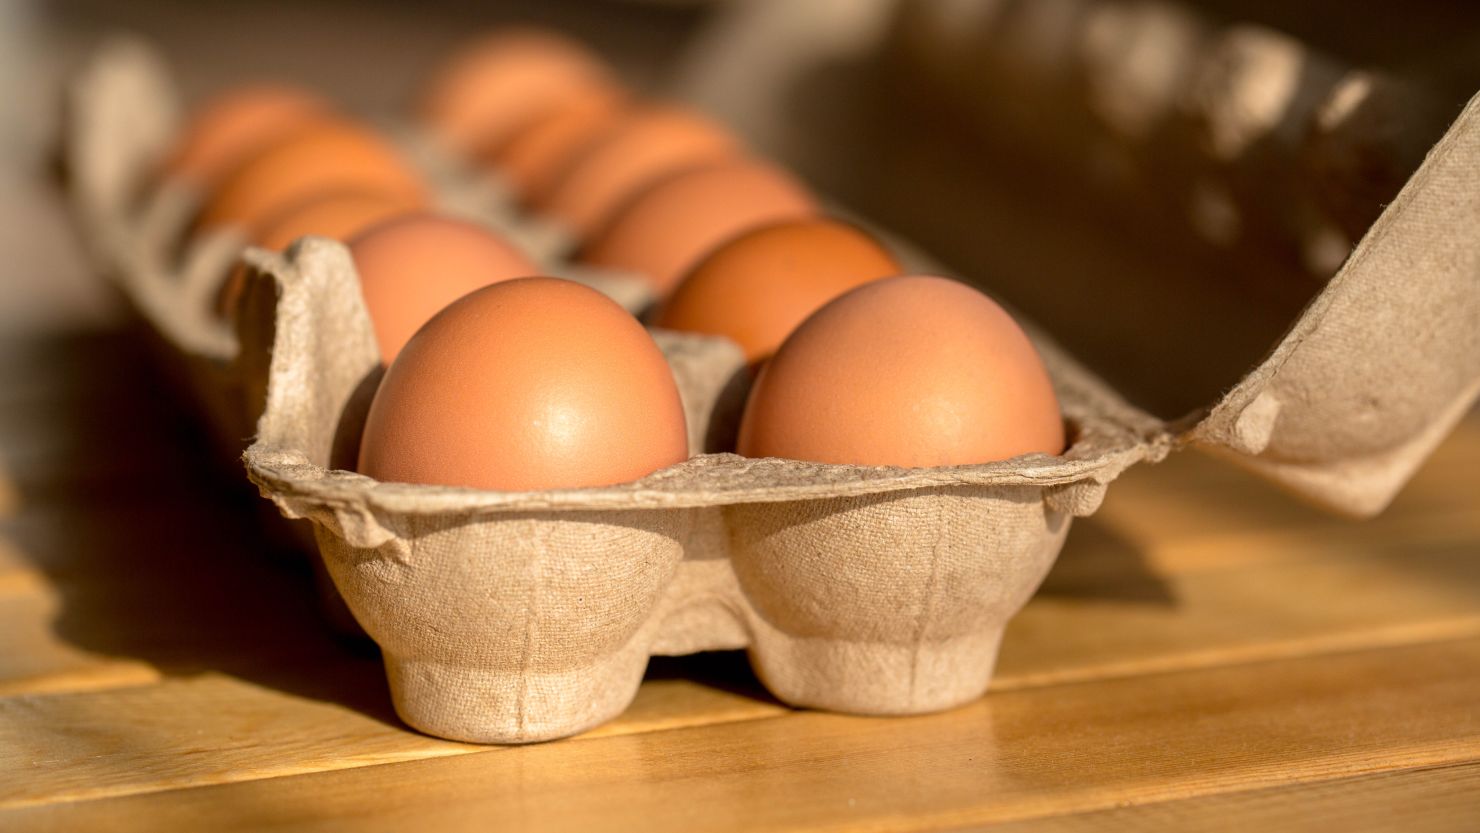 The average price of a dozen Grade A large eggs was $3 in February, according to the latest Consumer Price Index.